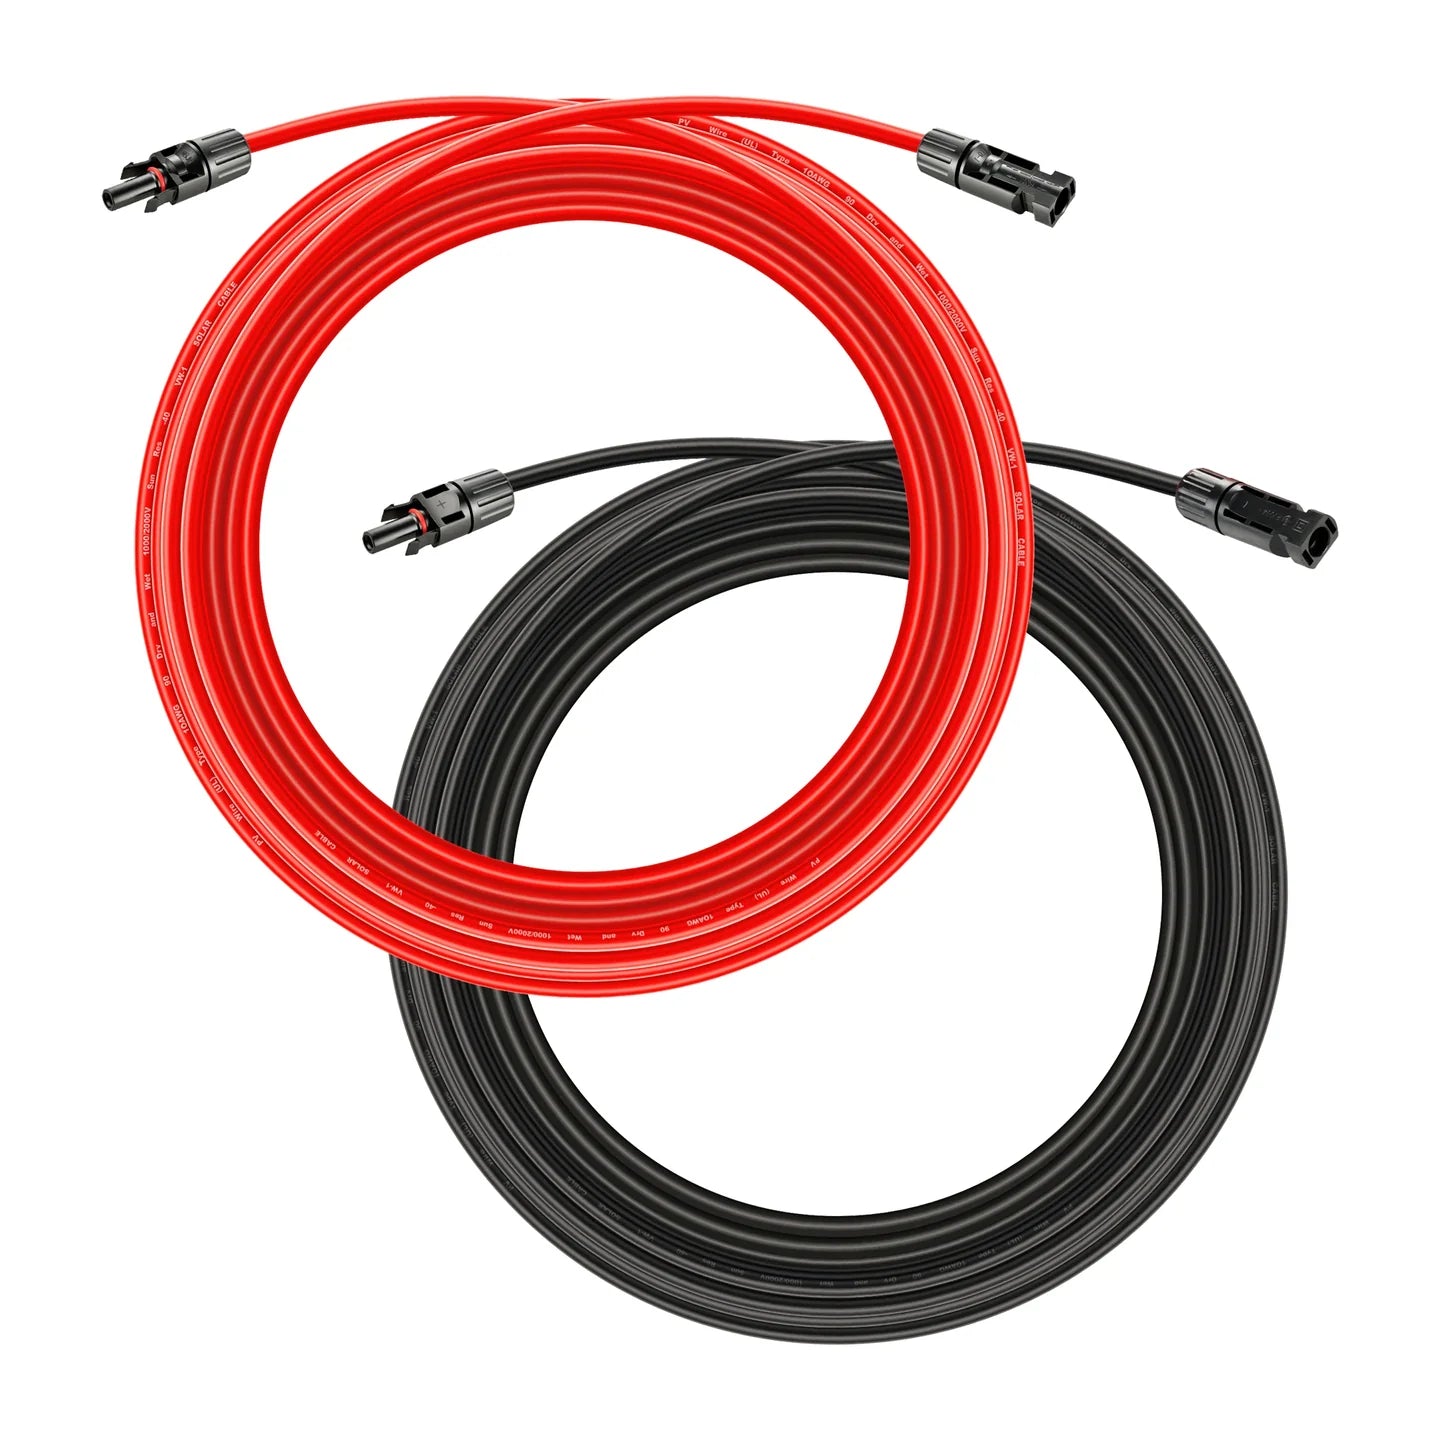 RICH SOLAR 10 Gauge (10AWG) Solar Panel Extension Cable Wire with Solar Connectors (Red & Black Set)